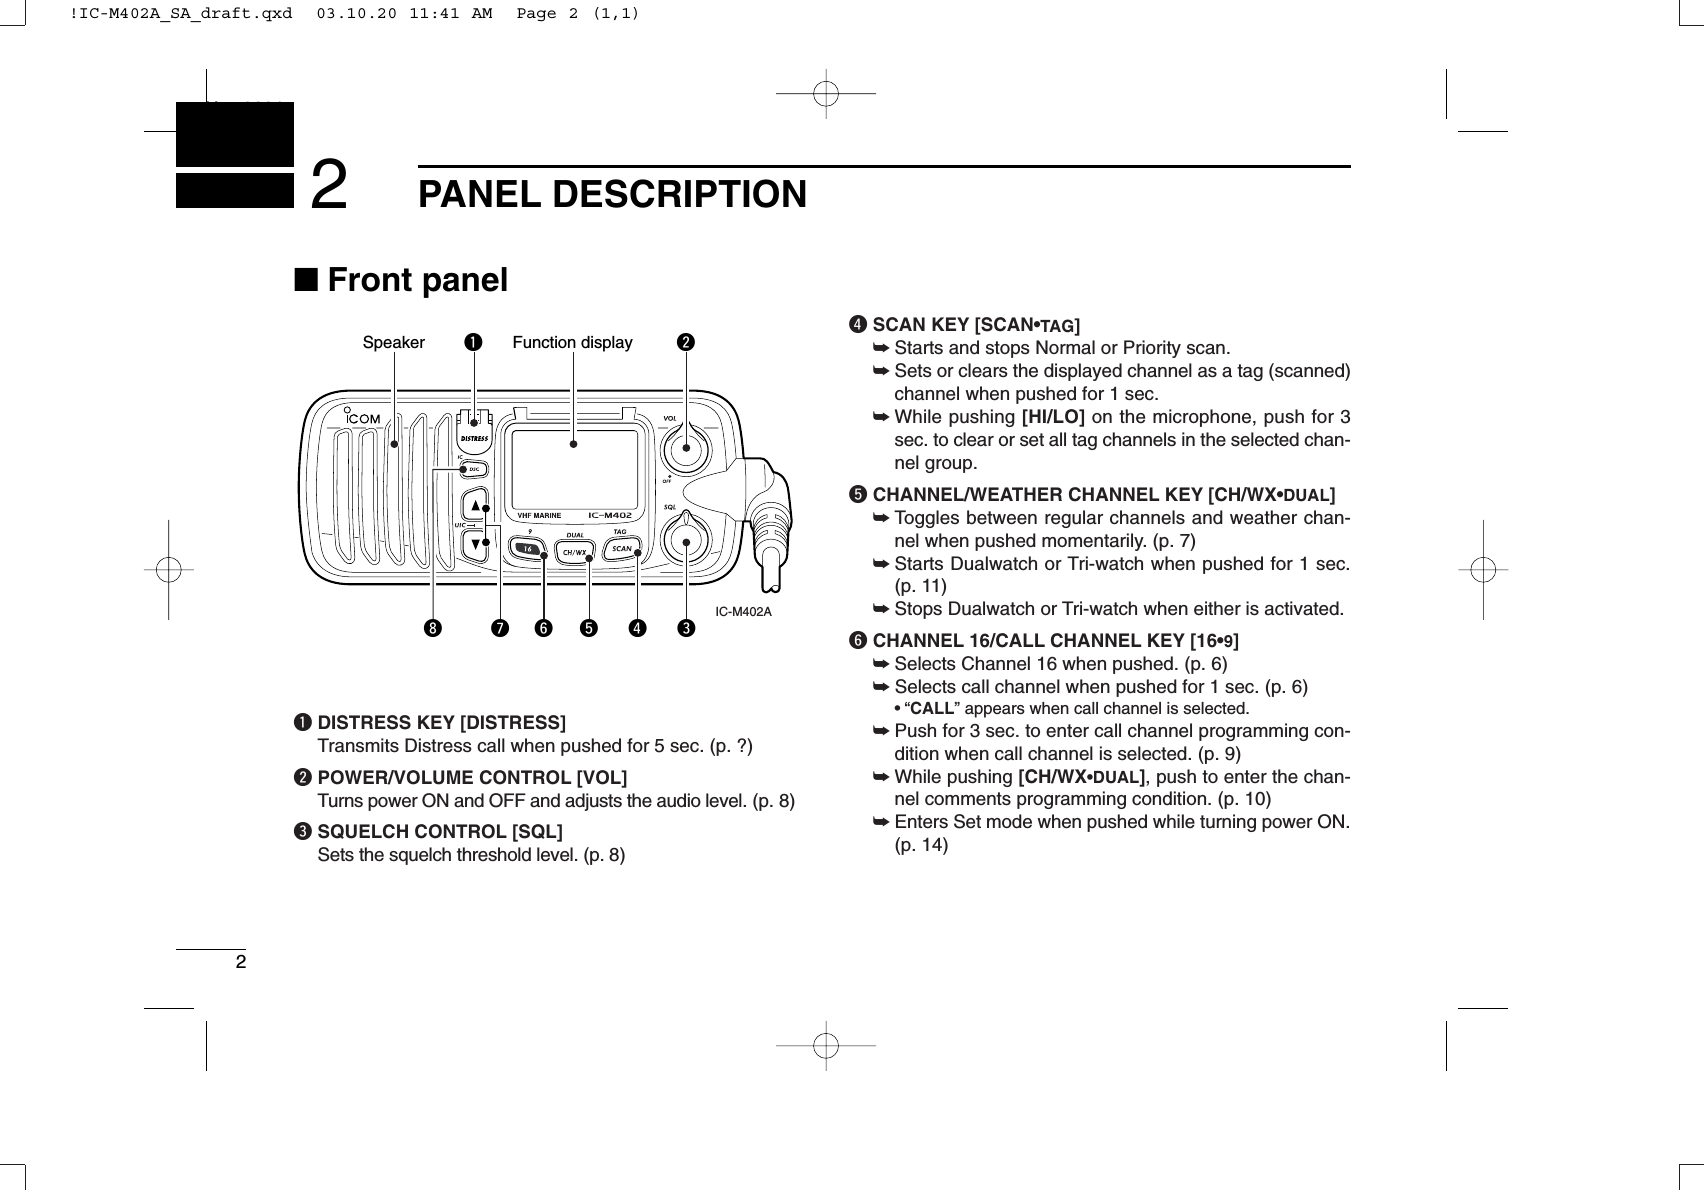 2PANEL DESCRIPTIONNew20012■Front panelqDISTRESS KEY [DISTRESS]Transmits Distress call when pushed for 5 sec. (p. ?)wPOWER/VOLUME CONTROL [VOL]Turns power ON and OFF and adjusts the audio level. (p. 8)eSQUELCH CONTROL [SQL]Sets the squelch threshold level. (p. 8)rSCAN KEY [SCAN•TAG]➥Starts and stops Normal or Priority scan.➥Sets or clears the displayed channel as a tag (scanned)channel when pushed for 1 sec.➥While pushing [HI/LO] on the microphone, push for 3sec. to clear or set all tag channels in the selected chan-nel group.tCHANNEL/WEATHER CHANNEL KEY [CH/WX•DUAL]➥Toggles between regular channels and weather chan-nel when pushed momentarily. (p. 7)➥Starts Dualwatch or Tri-watch when pushed for 1 sec. (p. 11)➥Stops Dualwatch or Tri-watch when either is activated.yCHANNEL 16/CALL CHANNEL KEY [16•9]➥Selects Channel 16 when pushed. (p. 6)➥Selects call channel when pushed for 1 sec. (p. 6)•“CALL” appears when call channel is selected.➥Push for 3 sec. to enter call channel programming con-dition when call channel is selected. (p. 9)➥While pushing [CH/WX•DUAL], push to enter the chan-nel comments programming condition. (p. 10)➥Enters Set mode when pushed while turning power ON.(p. 14)Speaker Function display wqeiuytr IC-M402A!IC-M402A_SA_draft.qxd  03.10.20 11:41 AM  Page 2 (1,1)